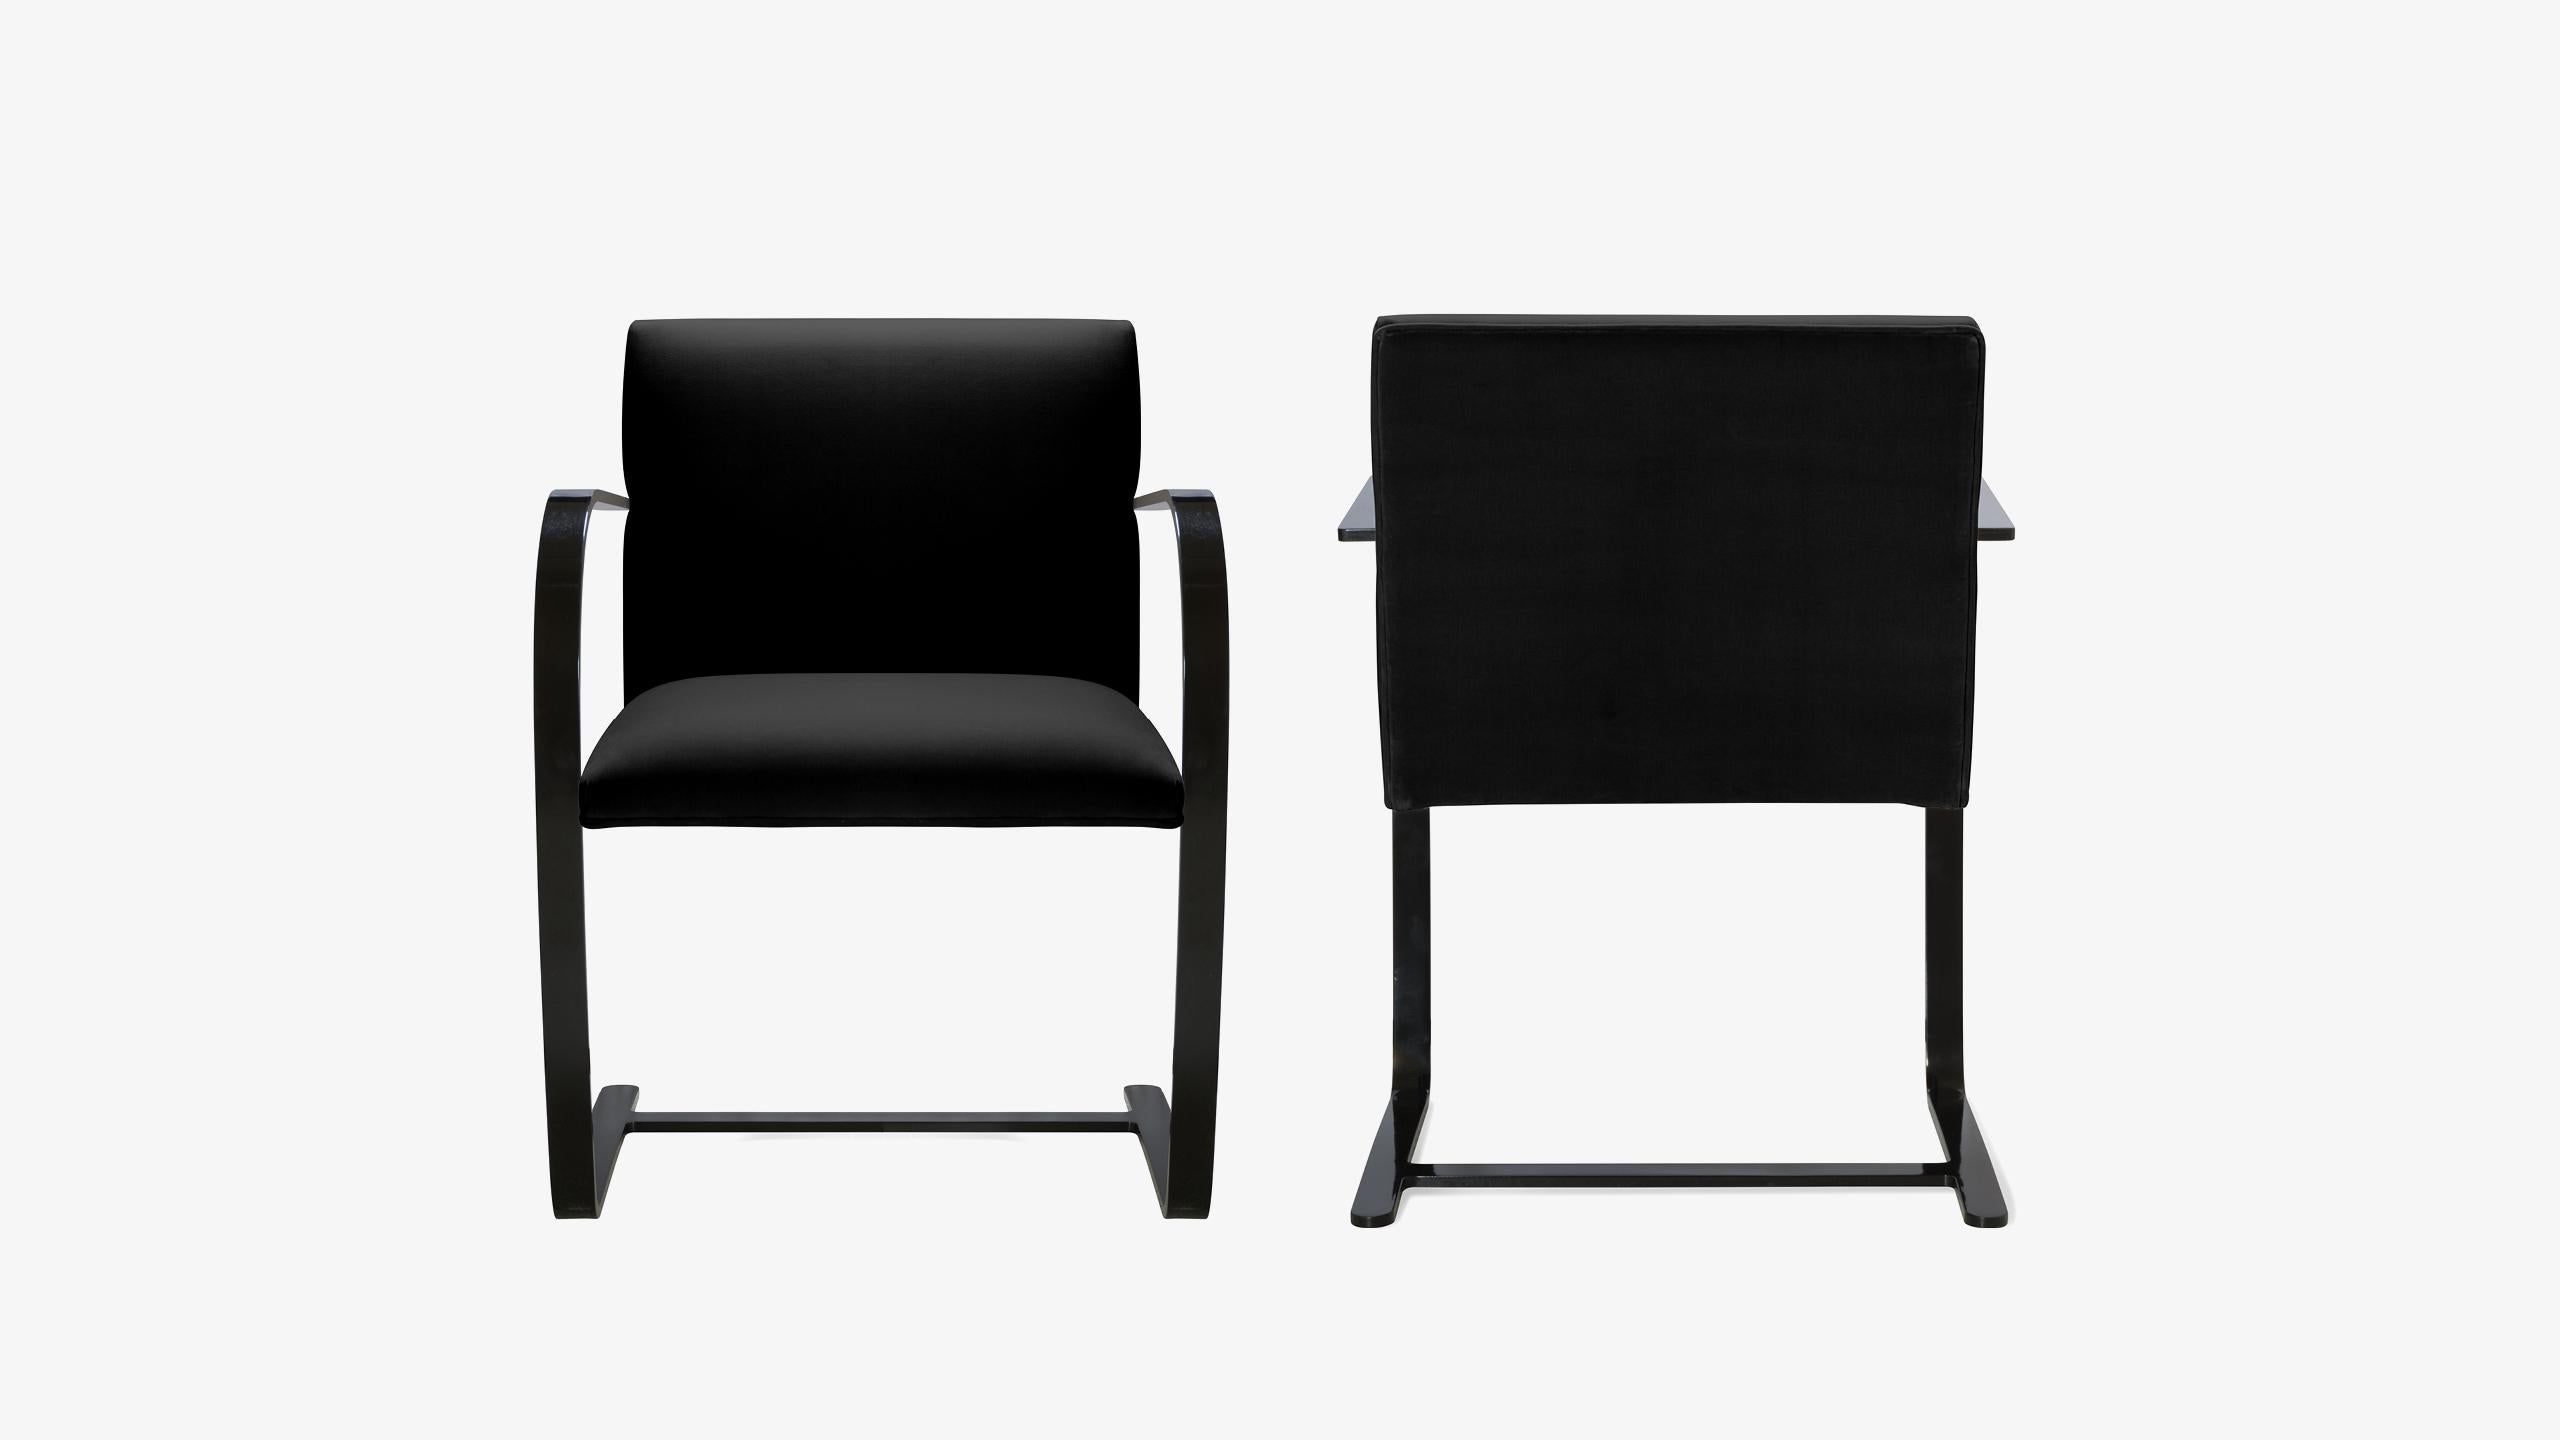 The definition of minimalism in a singular design, achieved by the great Ludwig Mies van der Rohe in 1929; the Brno Flat-Bar chair is just that. We have edited these contemporary iteration authentic originals in a way that’s never been done